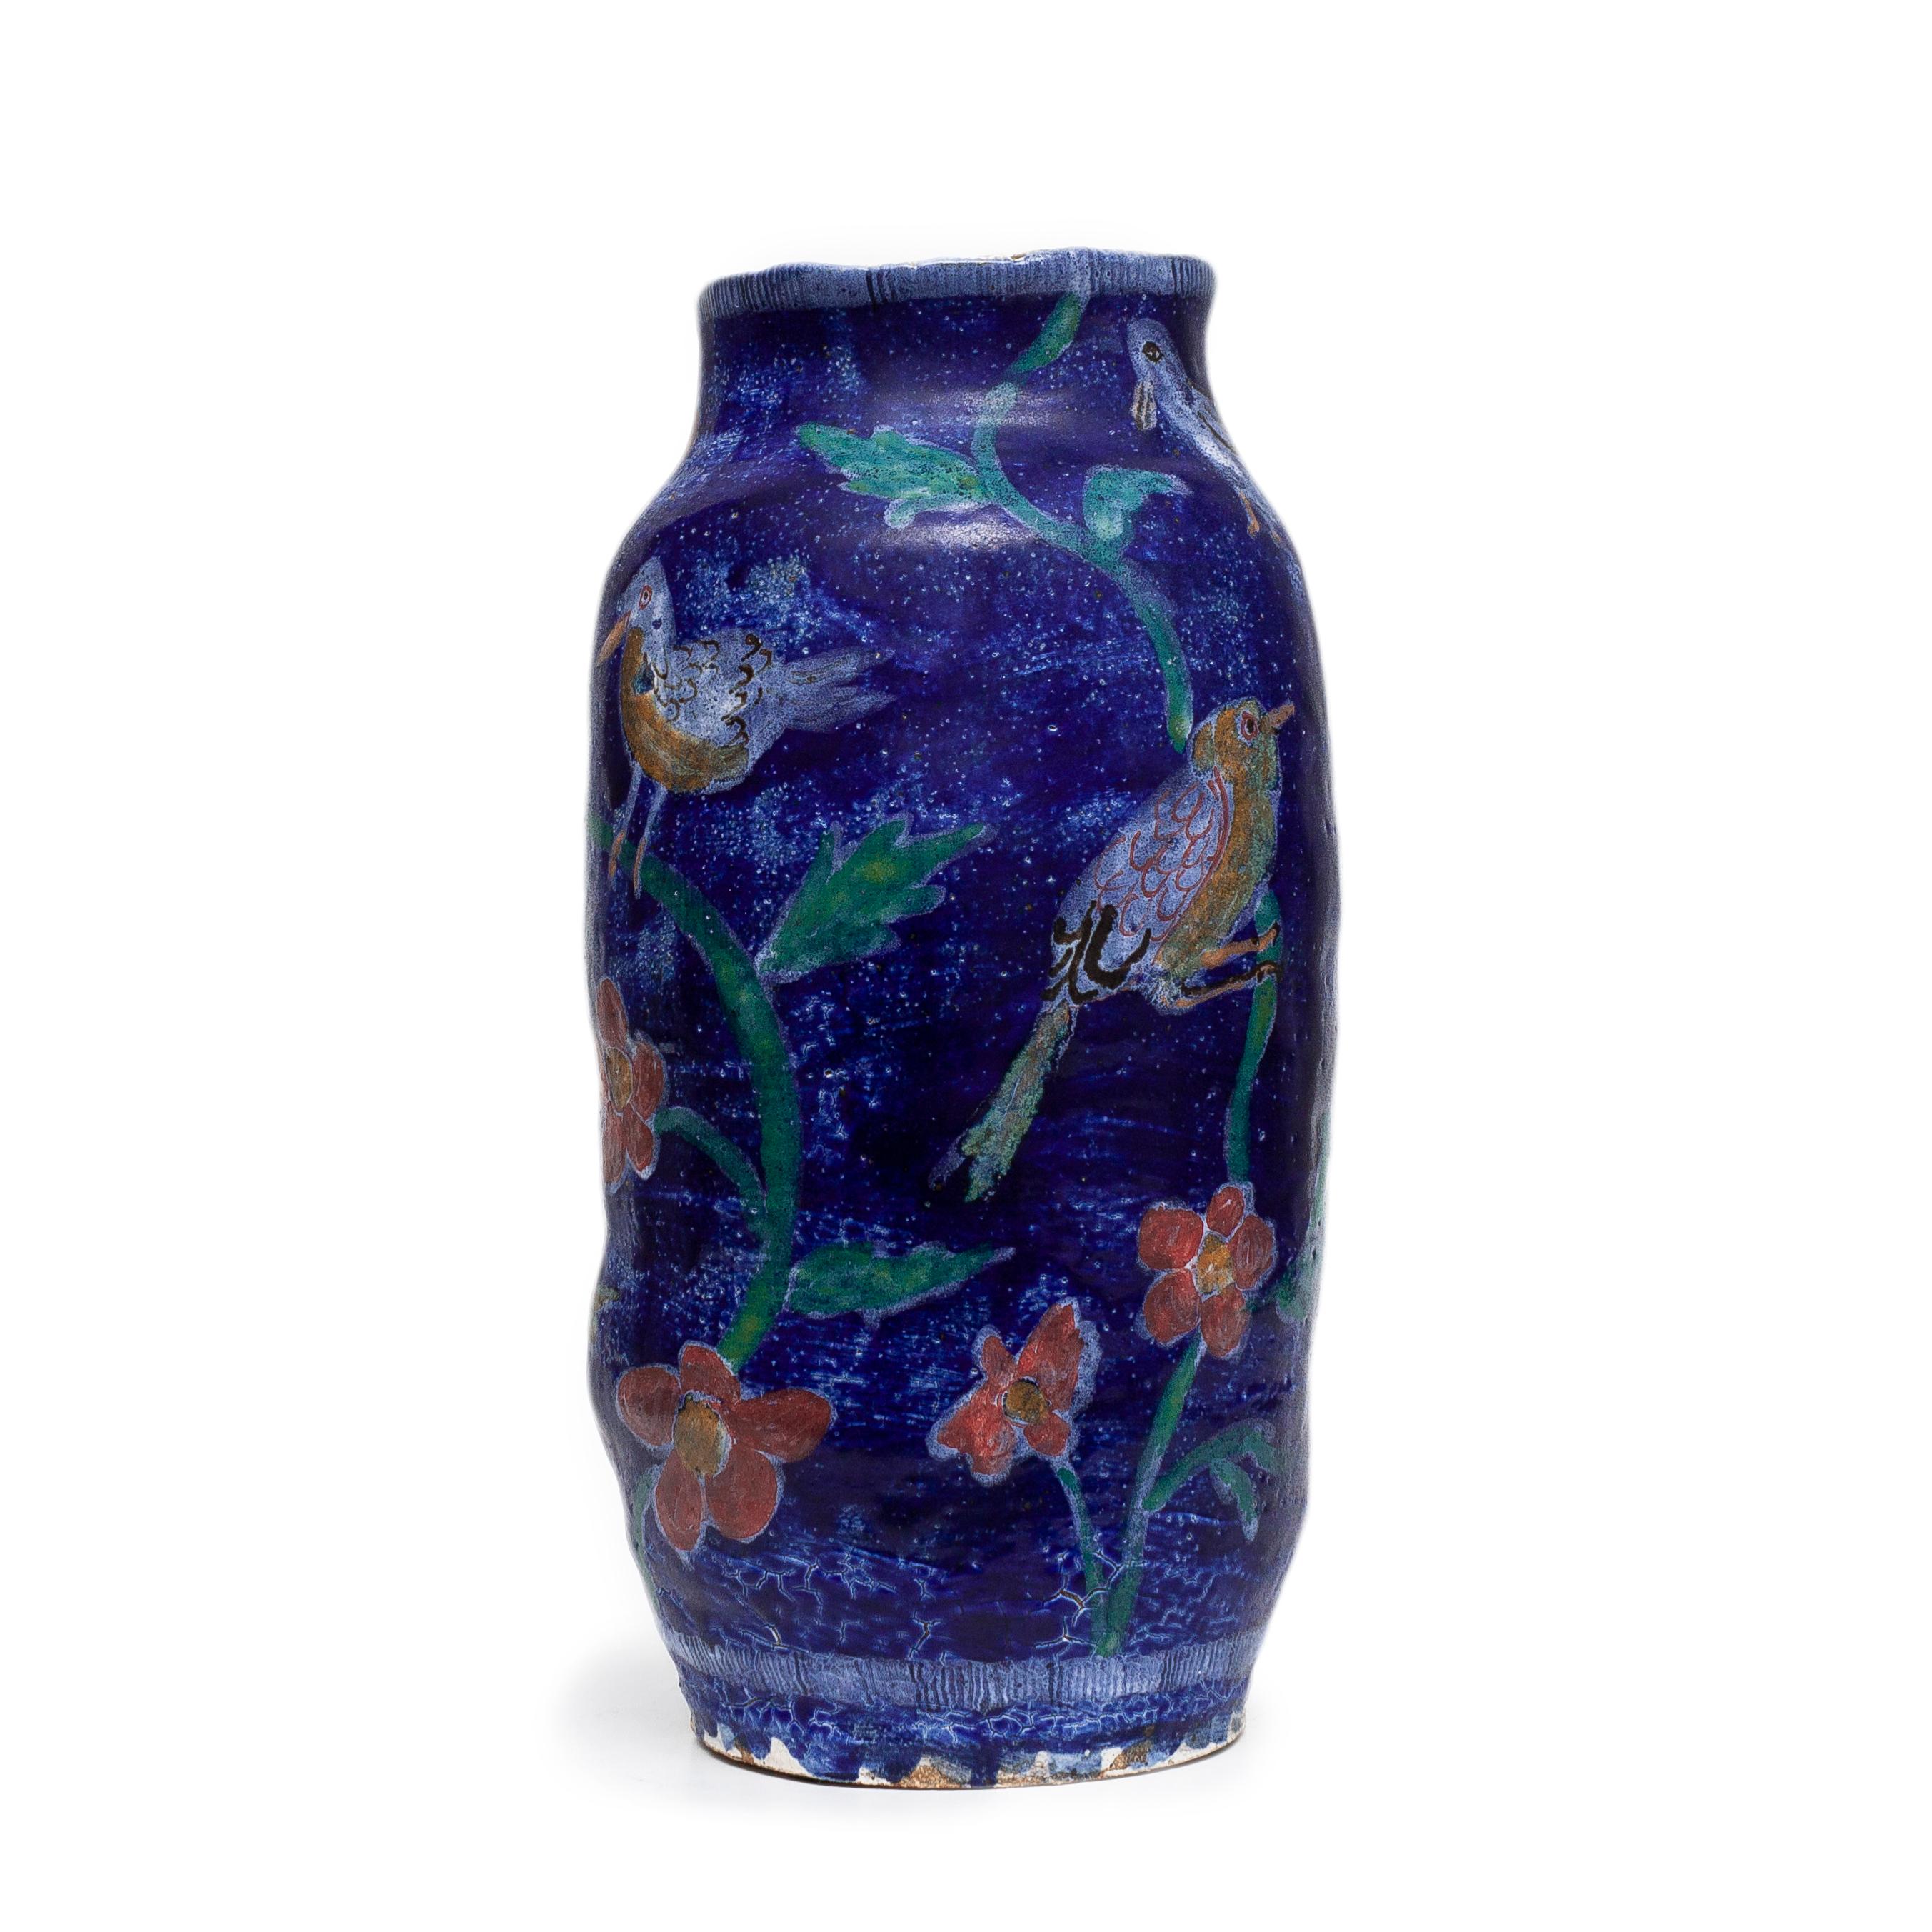 Flower and Bird Vase by Michael and Magdalena Suarez Frimkess - Art by Magdalena & Michael Frimkess